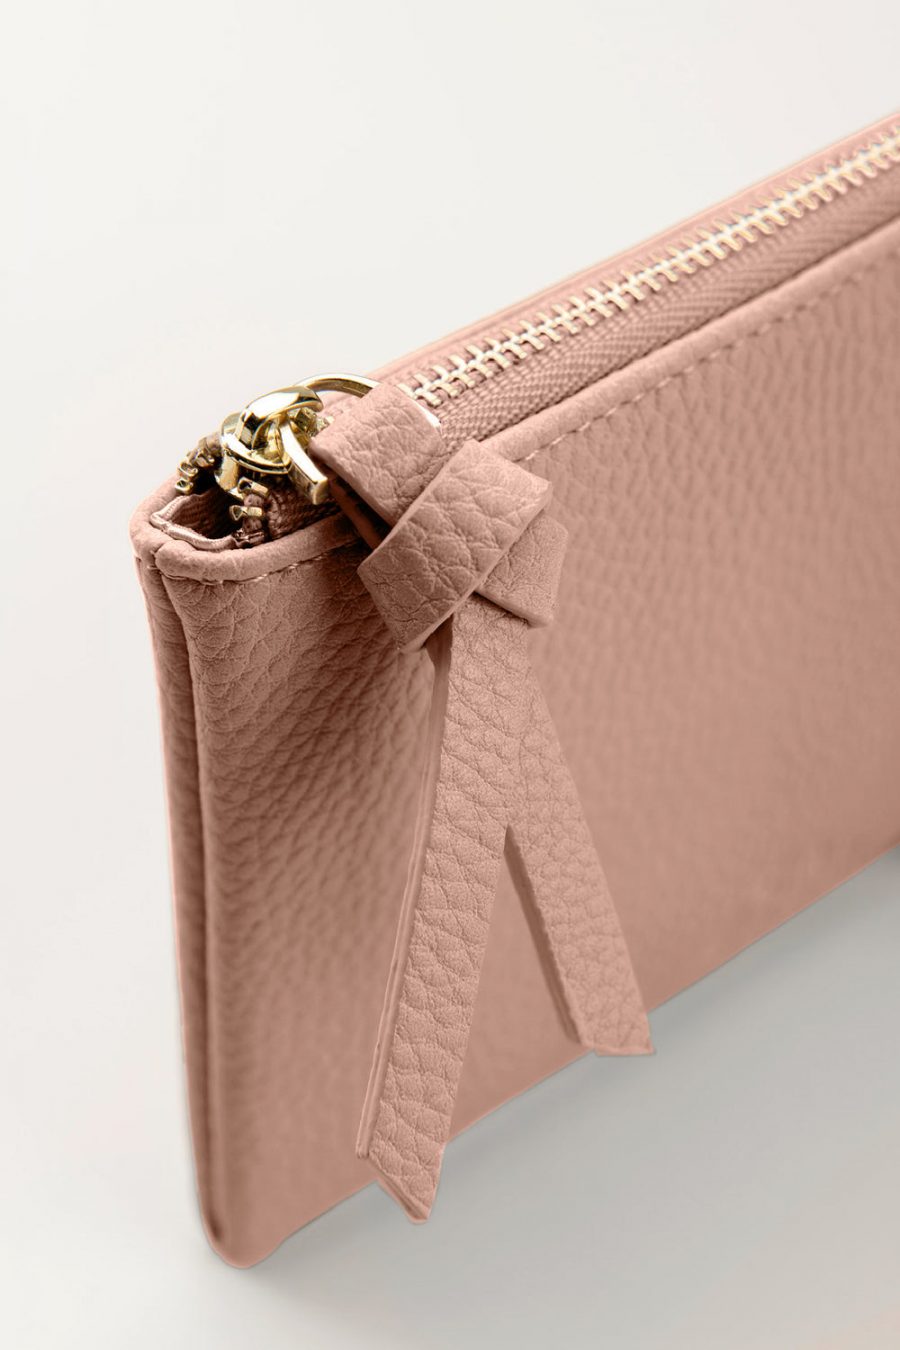 the eleventh small vegan leather pouch in rose